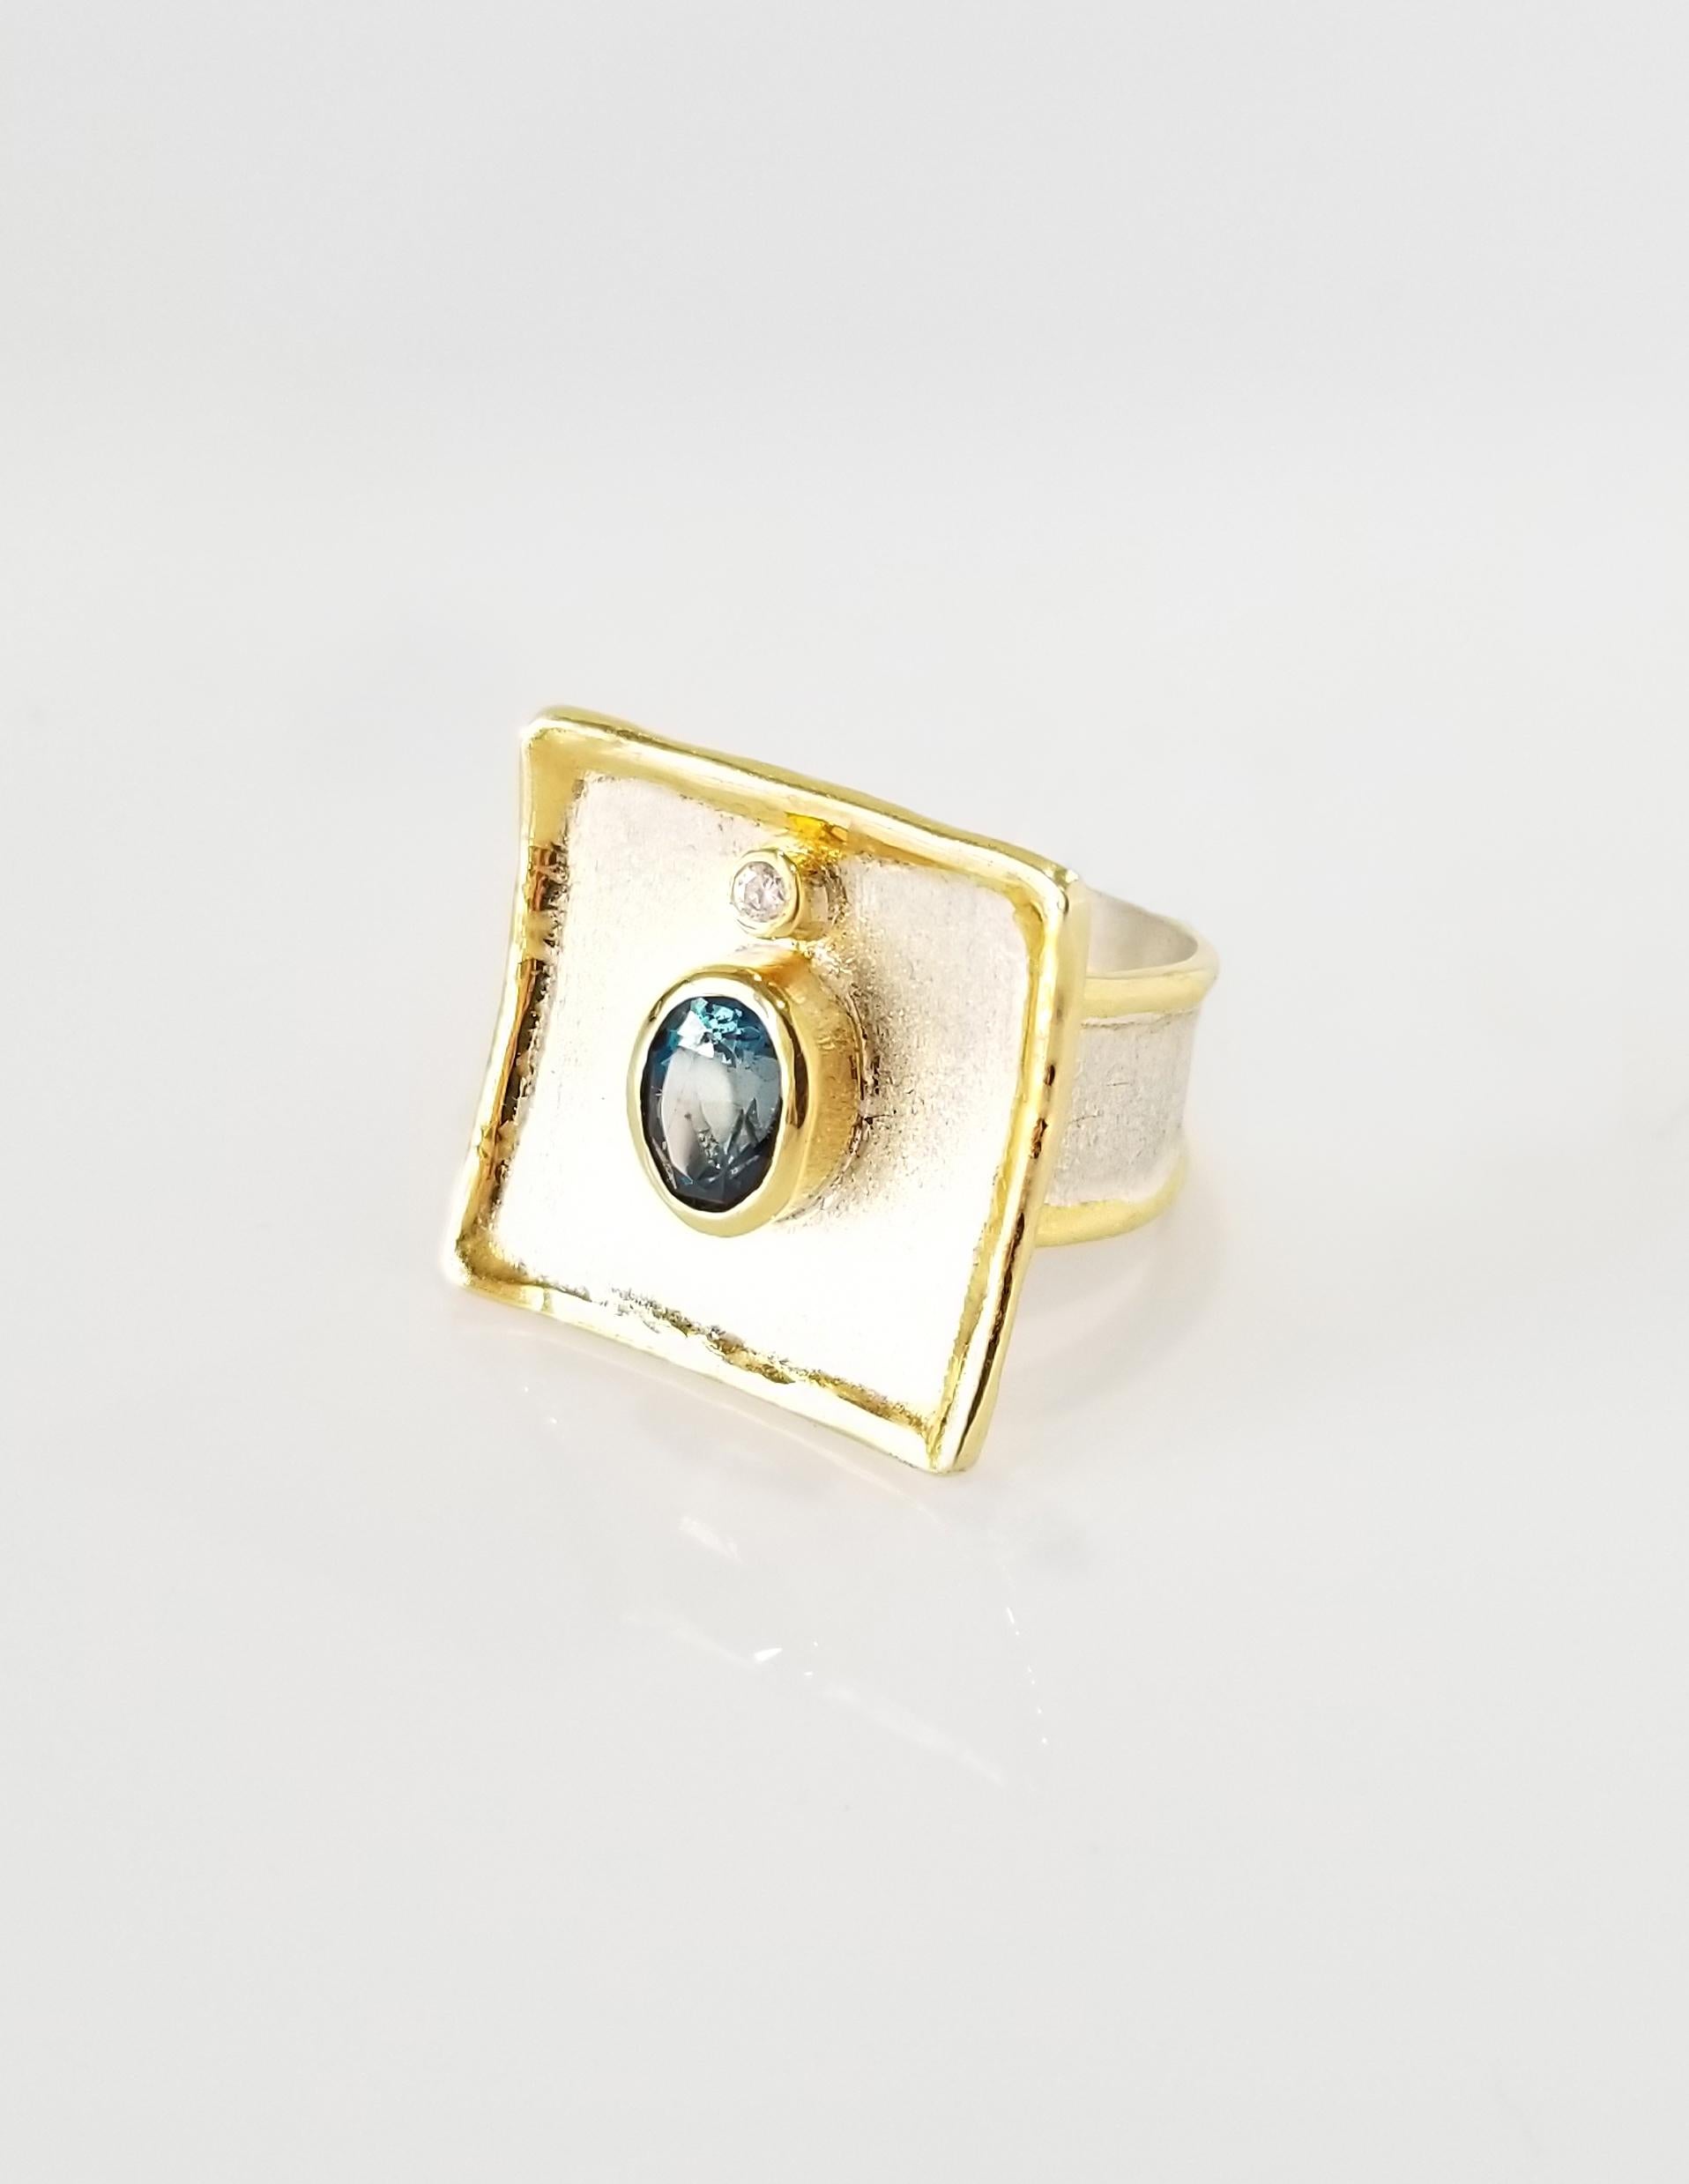 Yianni Creations London Blue Topaz Fine Silver and 24 Karat Gold Wide Band Ring In New Condition For Sale In Astoria, NY